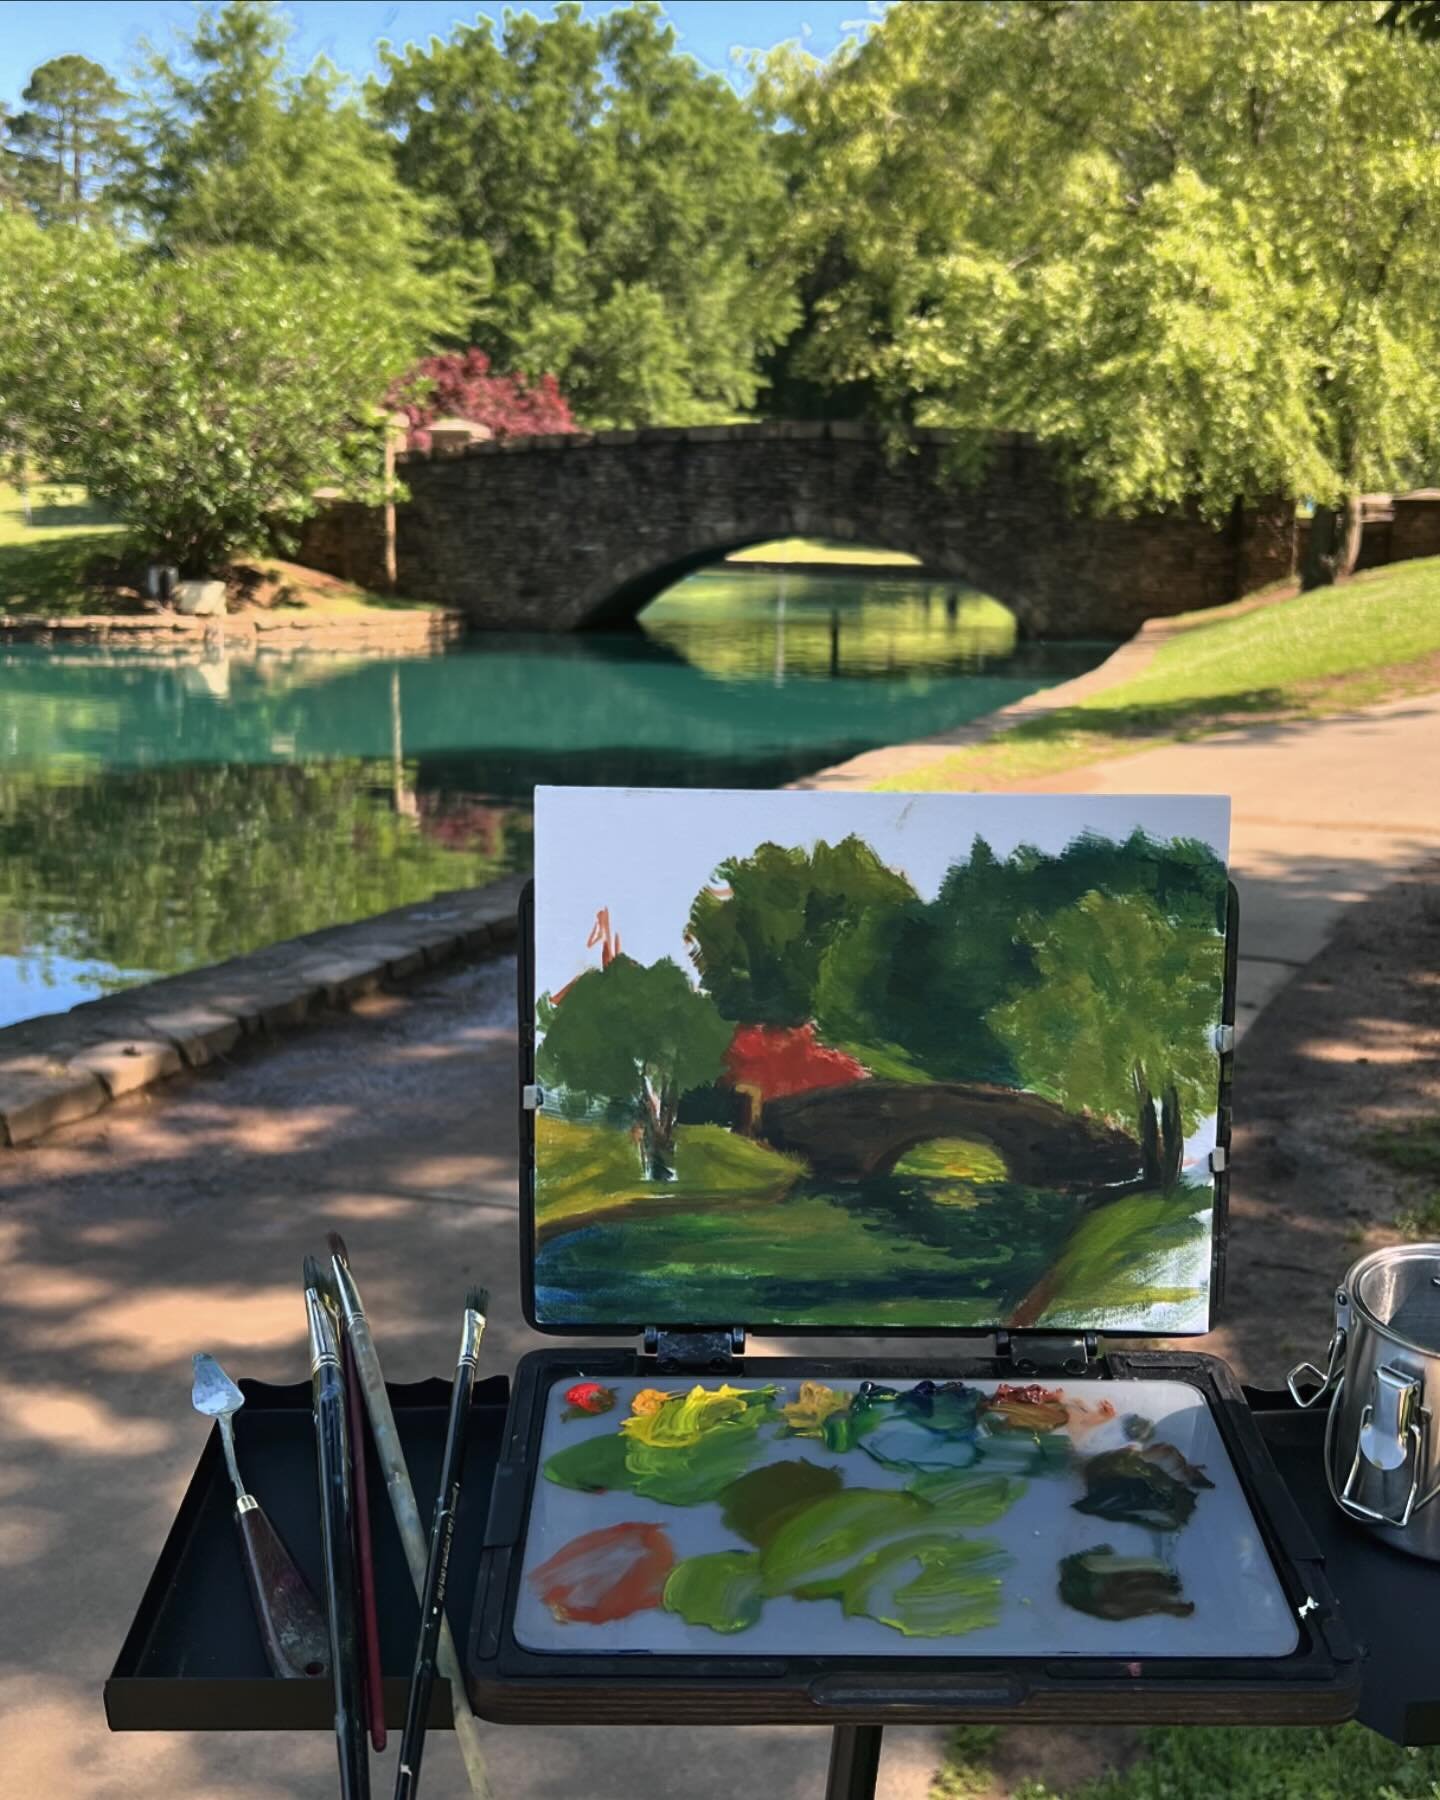 Beautiful day for Plein Air painting in Freedom Park.  Thank you to @jeancauthen and @tspilart for setting it up! 

I forgot to bring a tube of white so had to use the paints without any way to lighten the colors beyond light yellow.  It was an inter